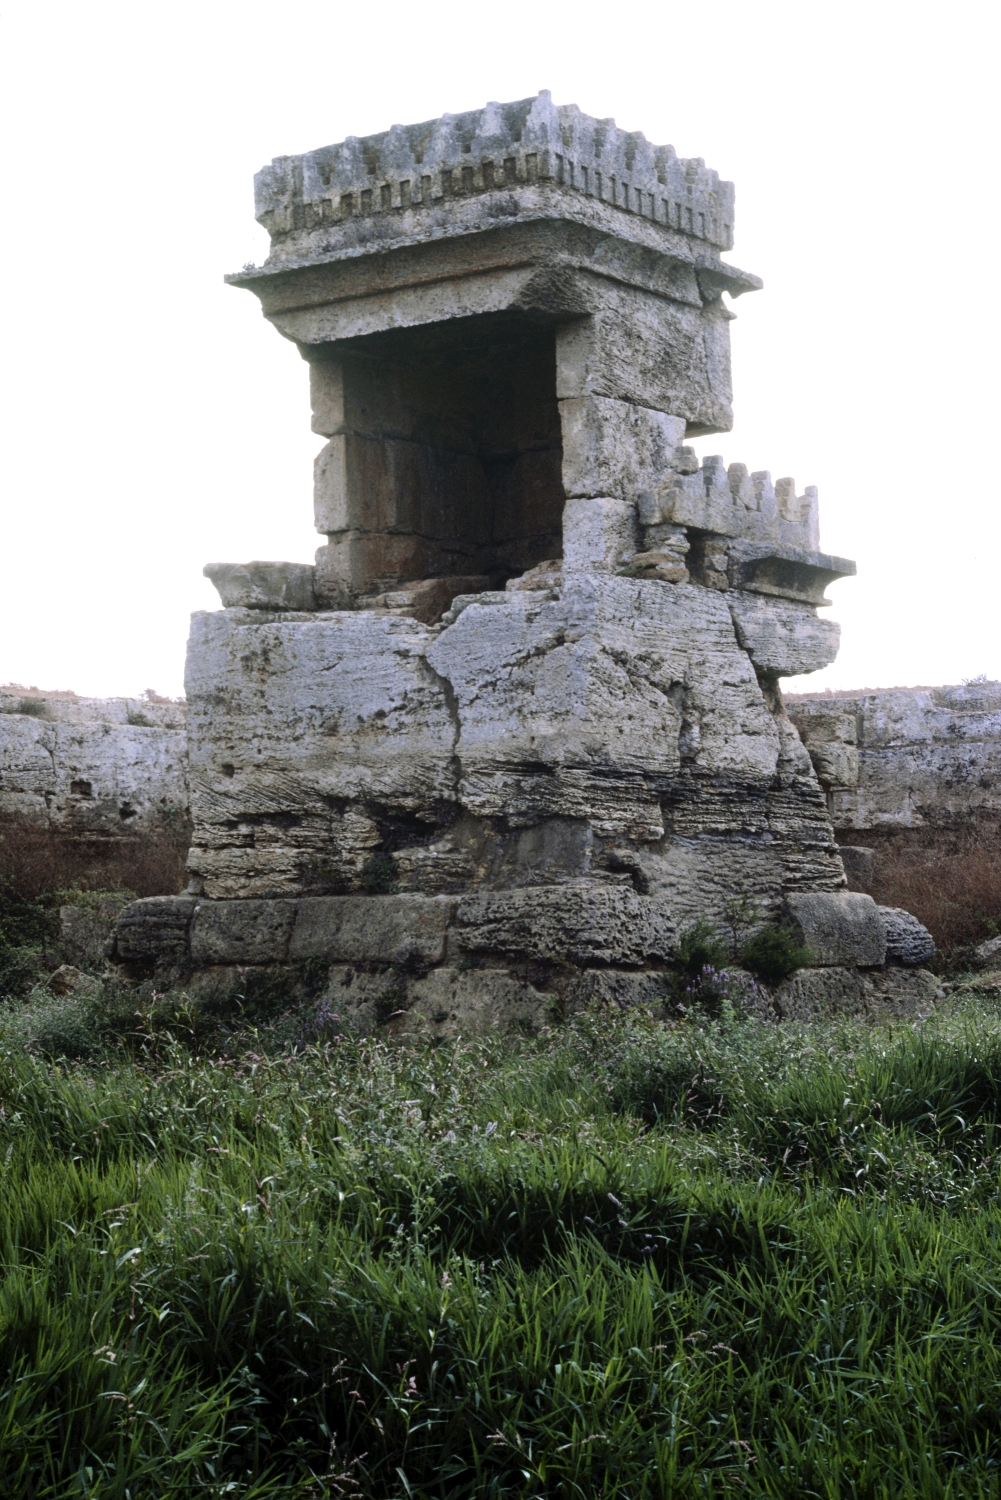 View of the temple's cella